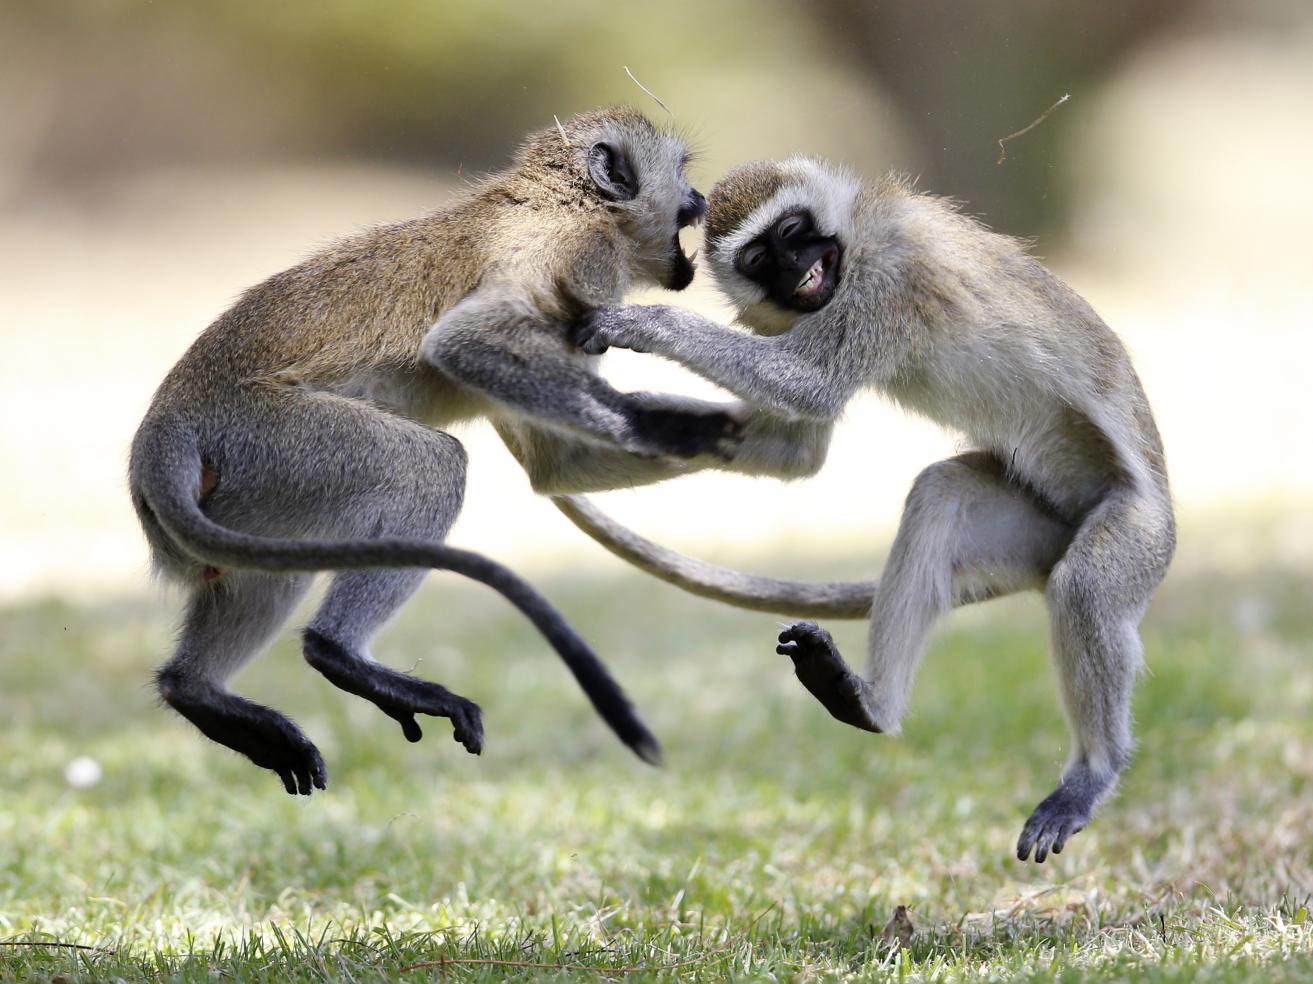 Two Tantalus monkeys play fighting